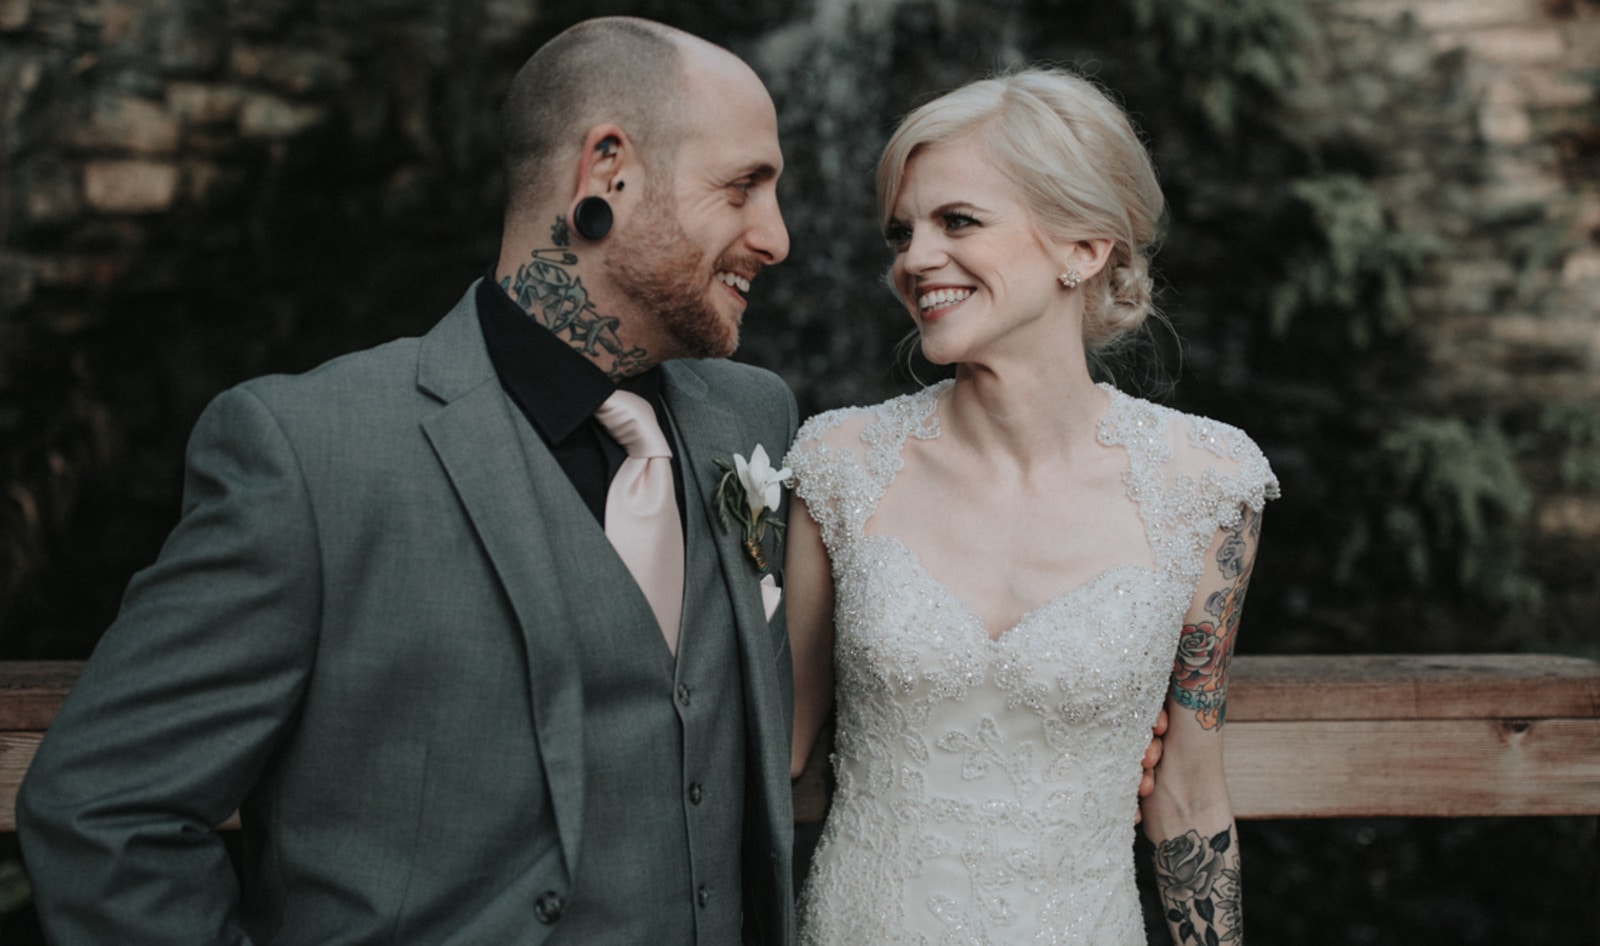 Temporary Tattoos, Exotic Flowers, and Avocado Fries—This Vegan Wedding Had It All